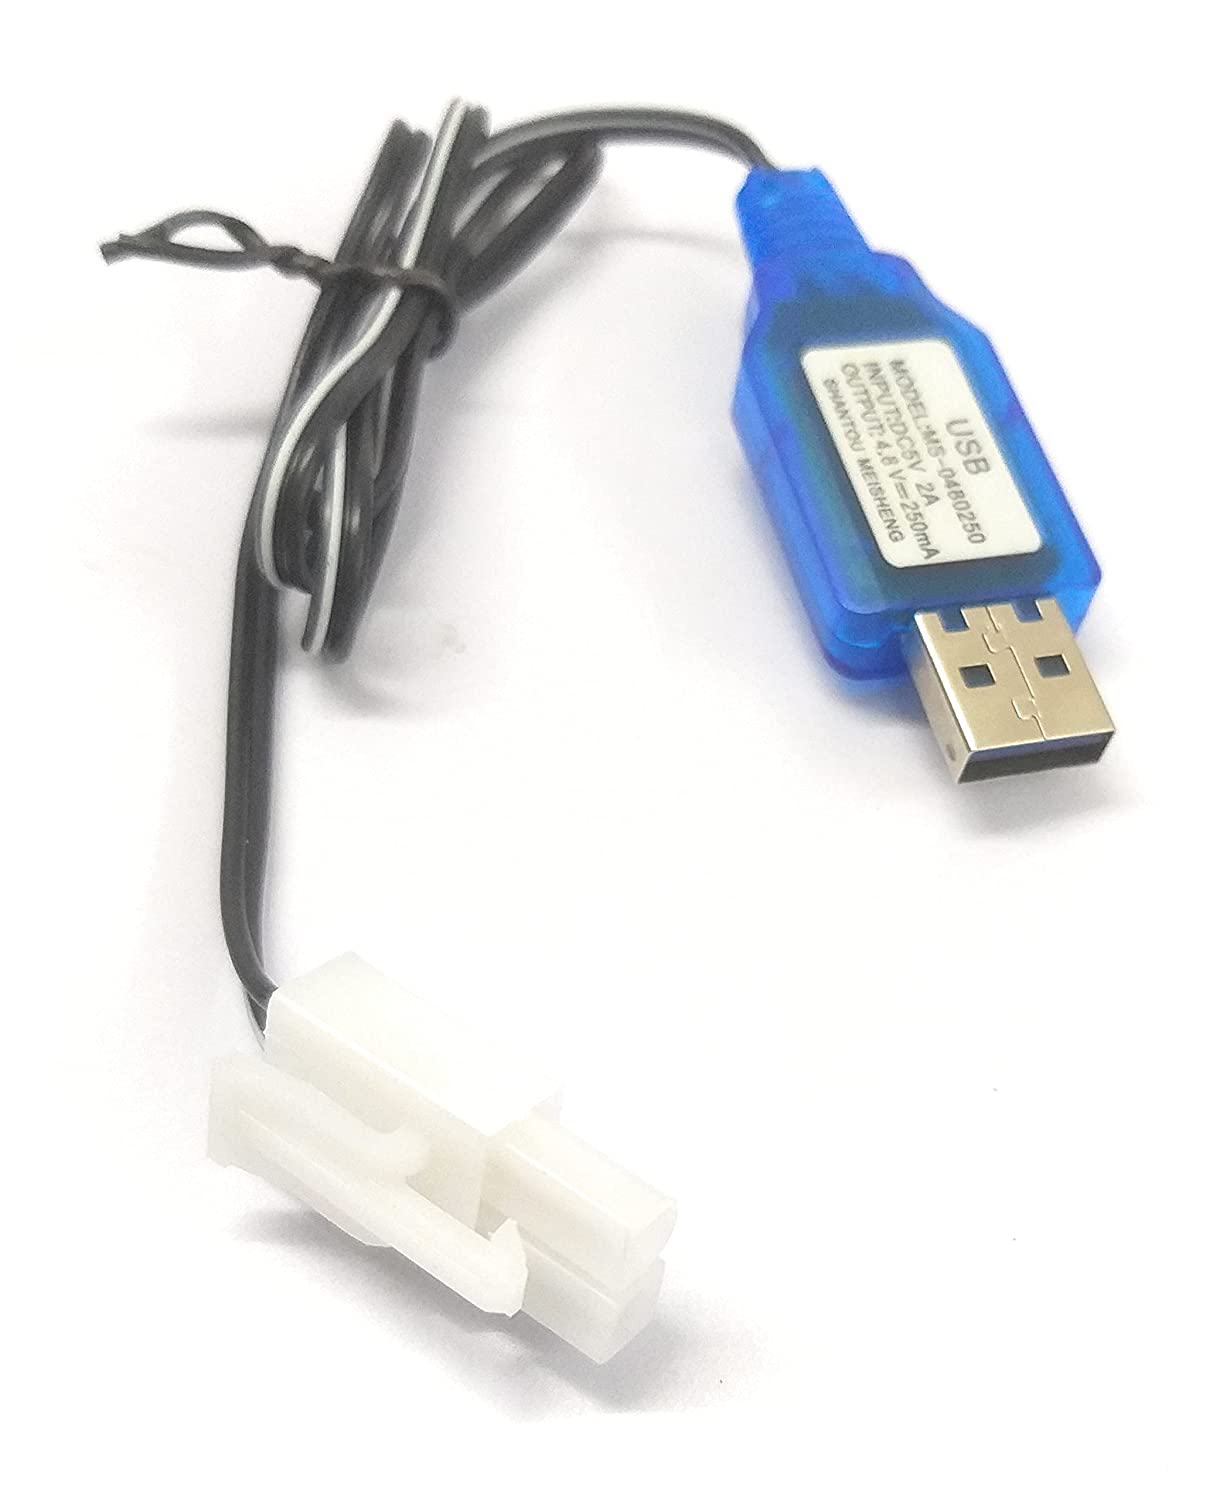 USB Charging Cable including Charging Protection BMS with L6.2-2P Plug for Ni-CD/Ni-MH Battery RC Cars/ DIY